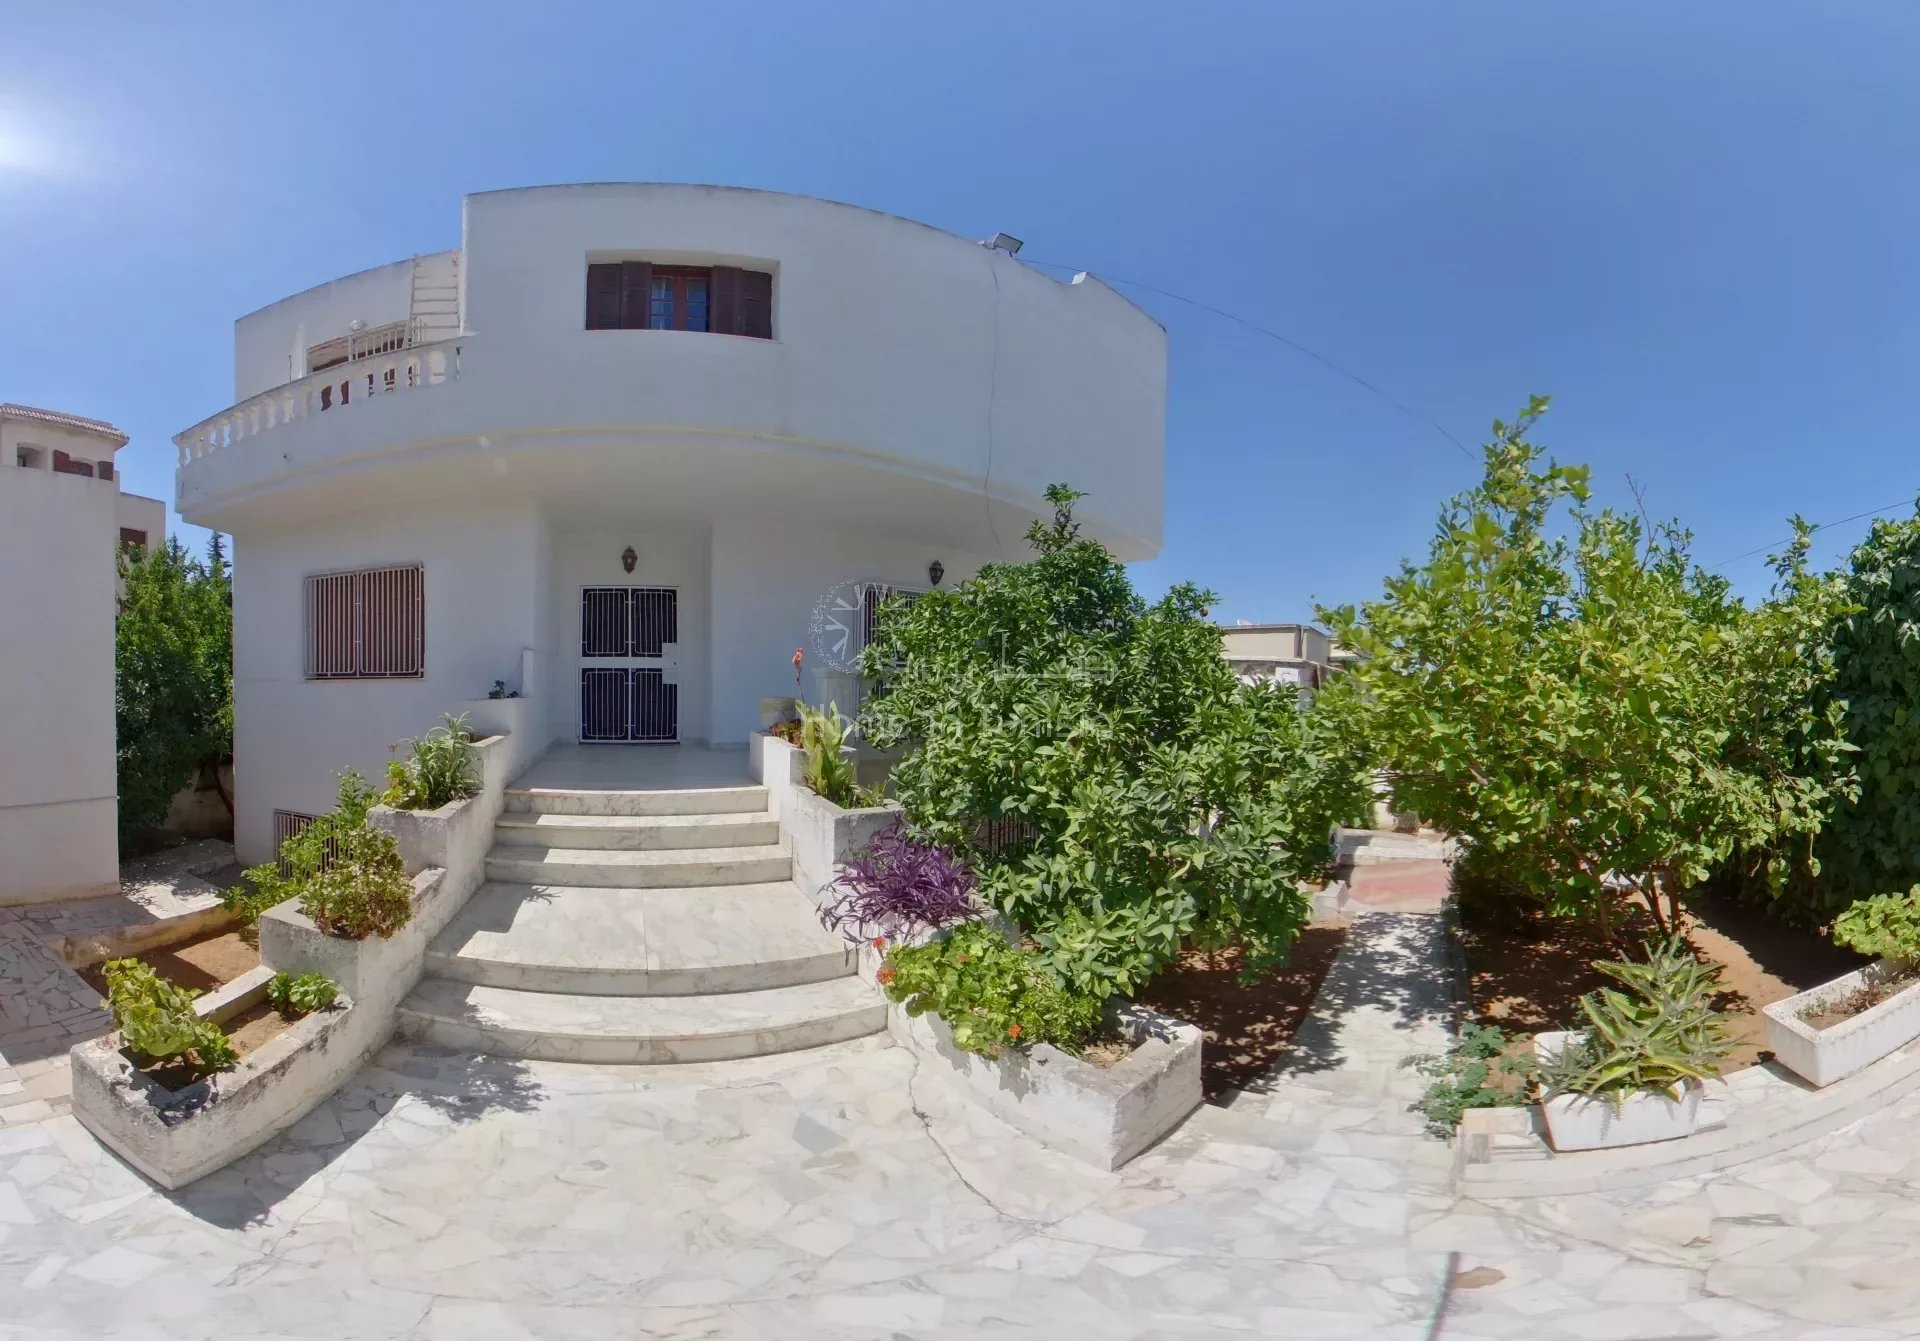 Spacious and green villa in Tunis